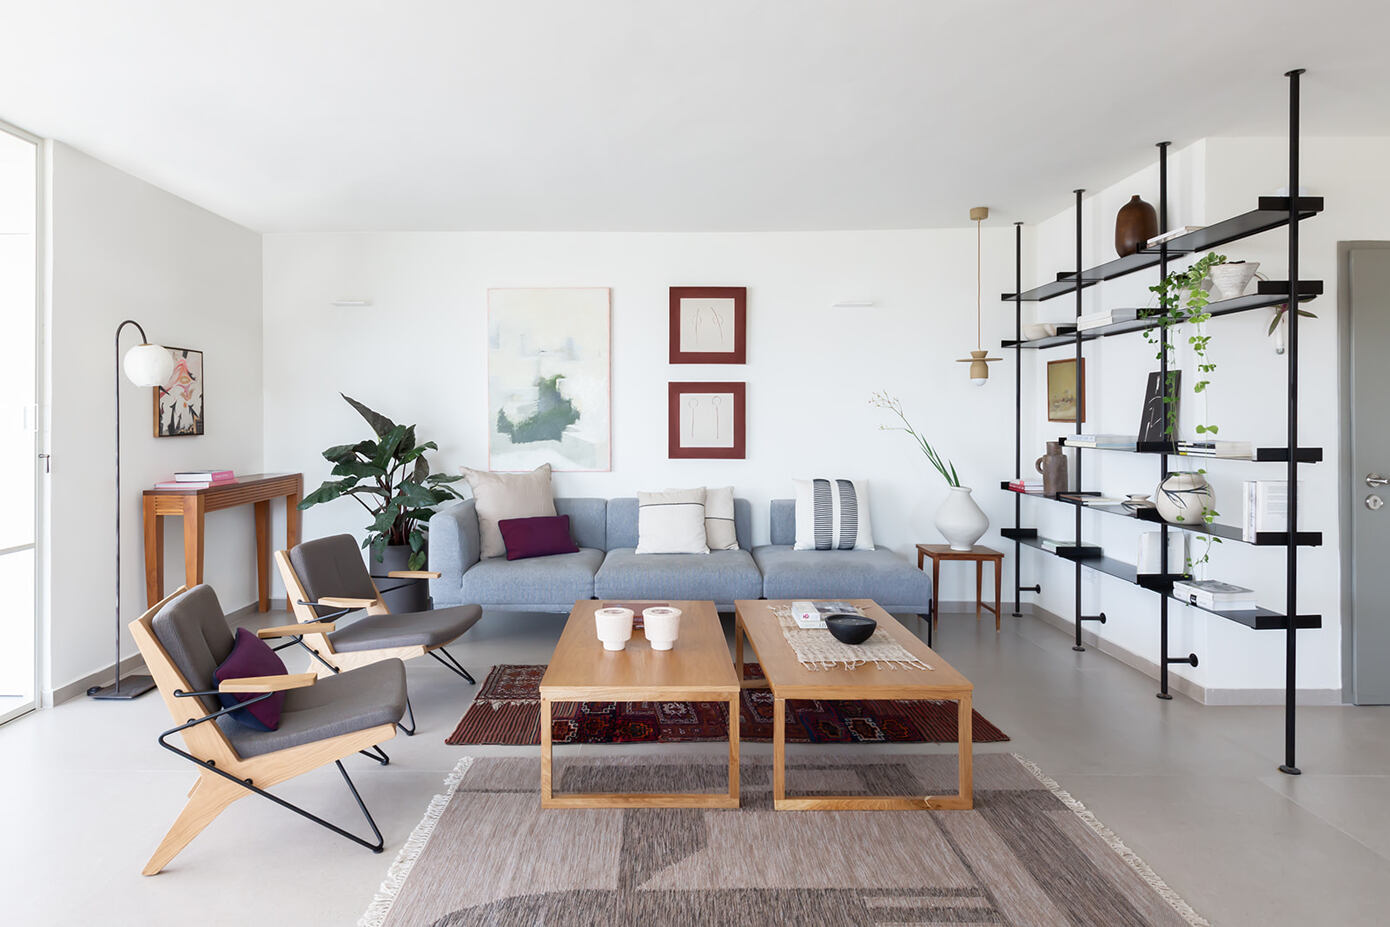 The Renovation Home: Einat Shahar Freiman’s Mid-Century Revival in Israel